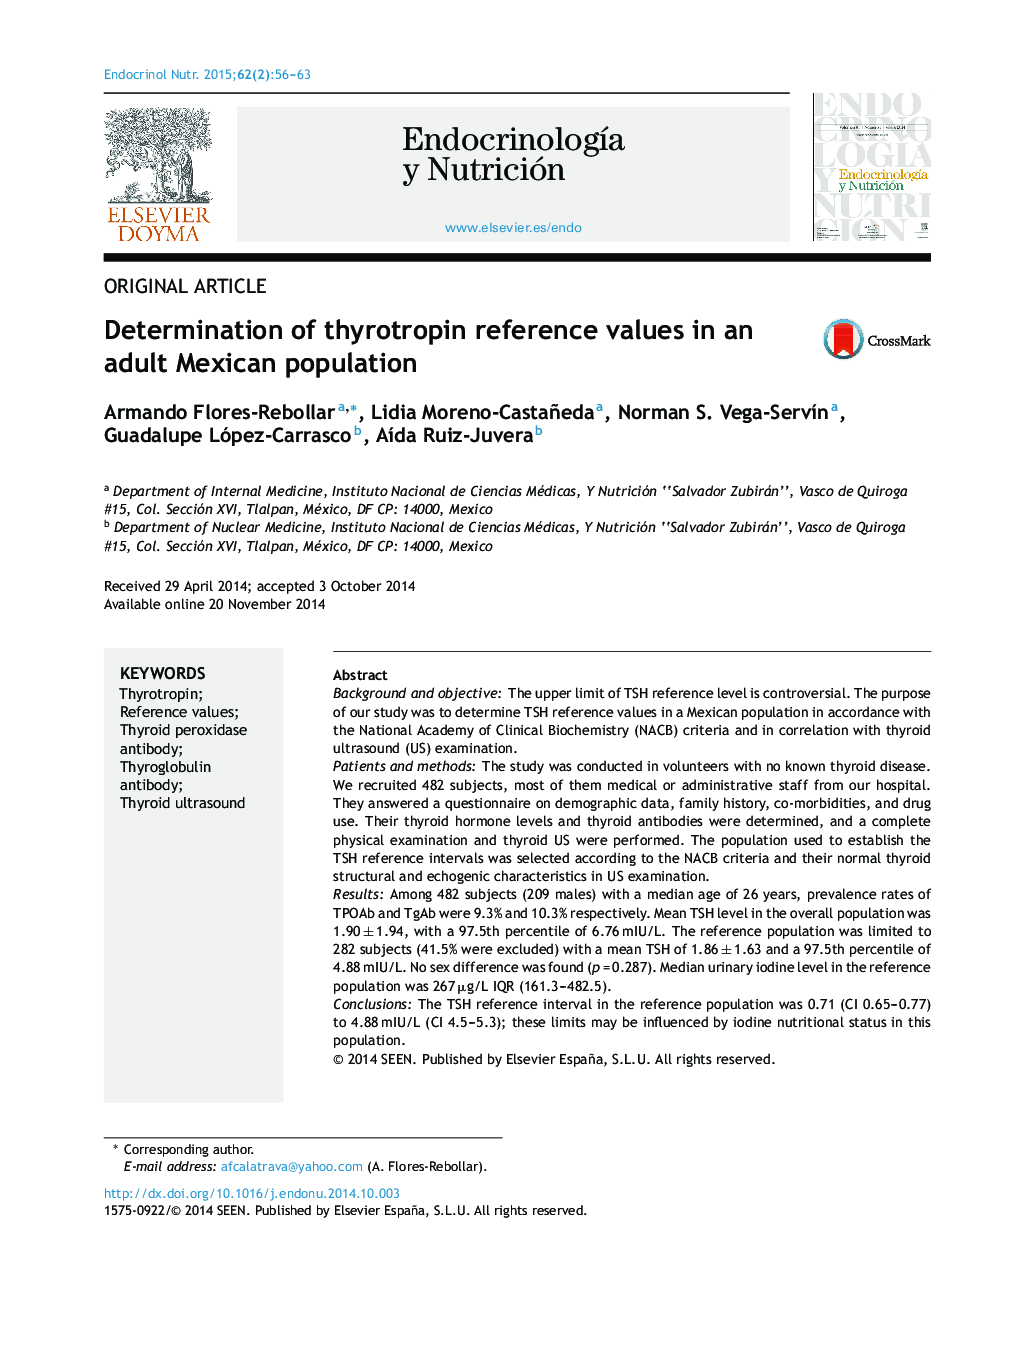 Determination of thyrotropin reference values in an adult Mexican population